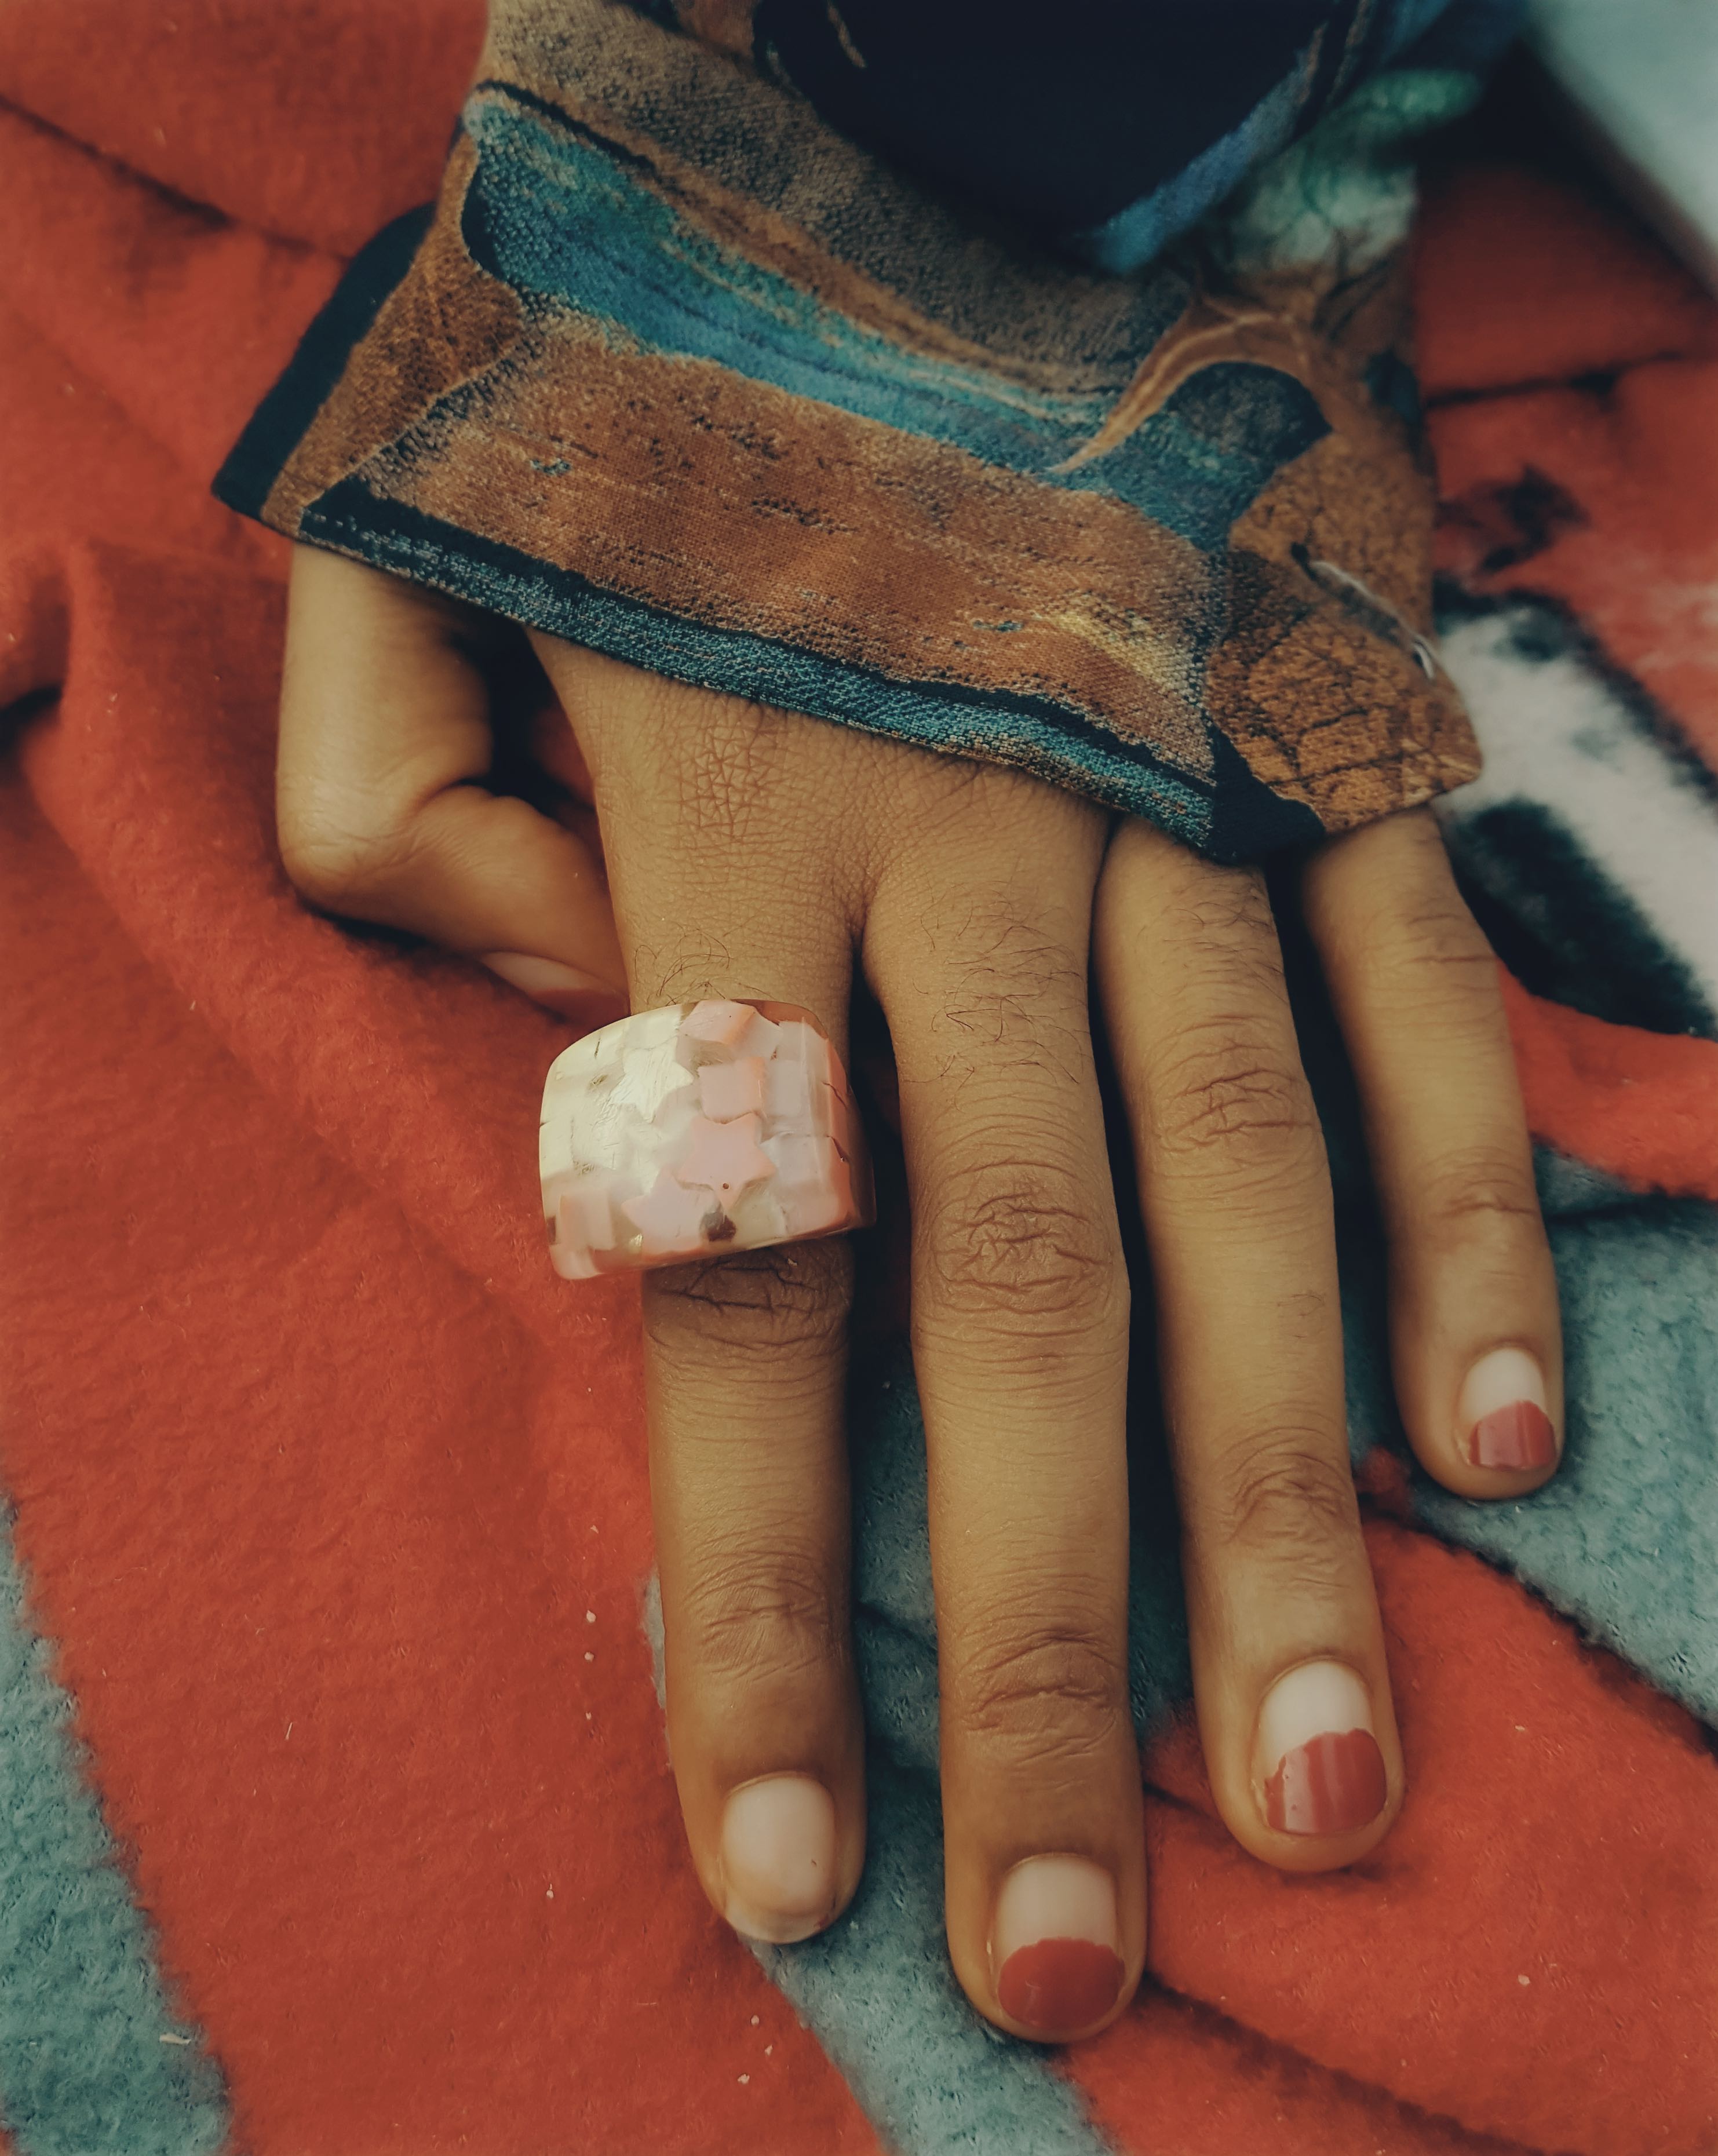 A hand on a patterned sheet with half painted nails and a large pink stone ring. 